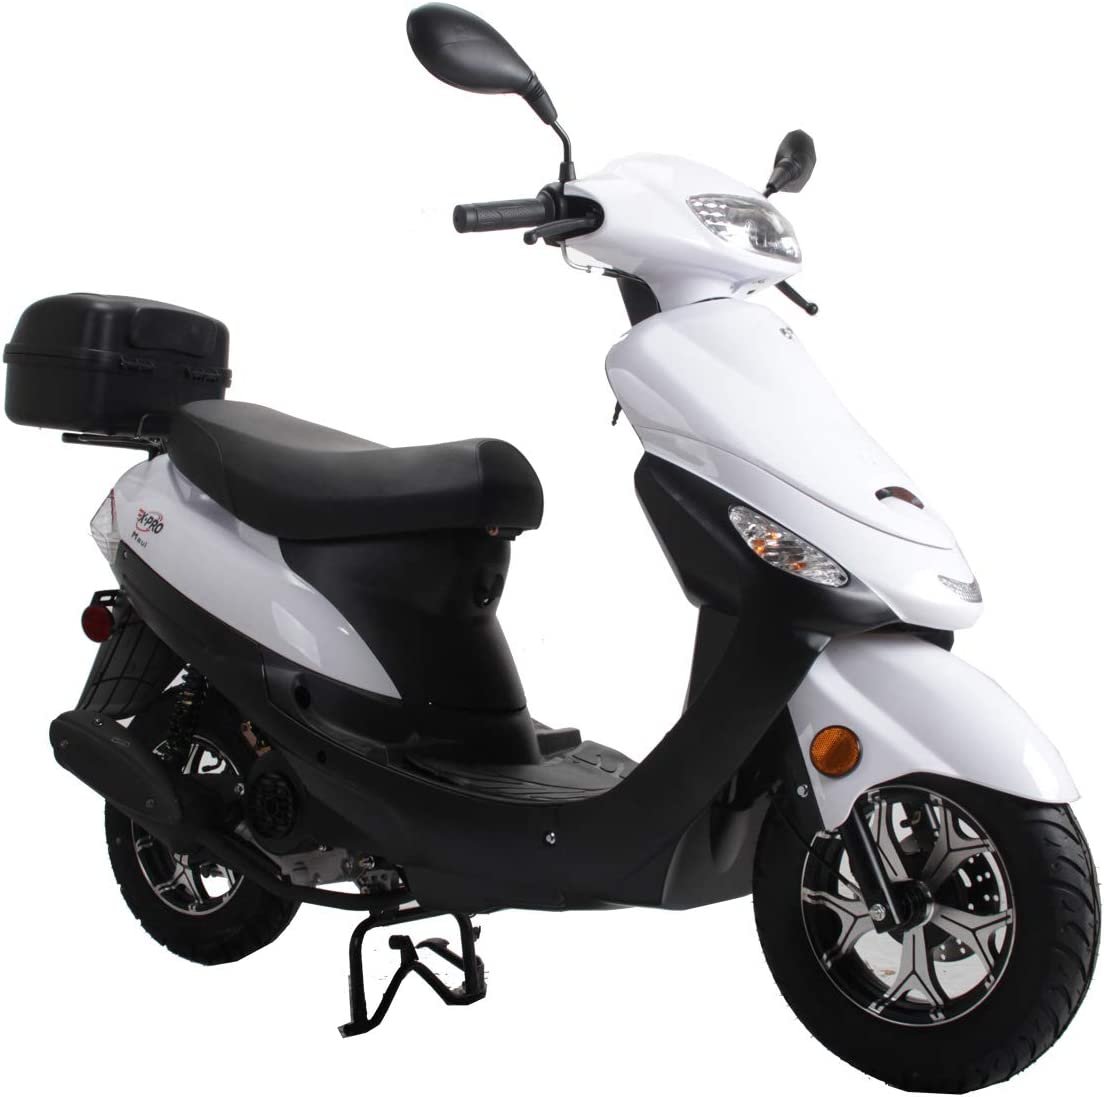 X-PRO 50cc Adult Moped Gas Moped Motorcycle 50cc with 10" Aluminum Wheels